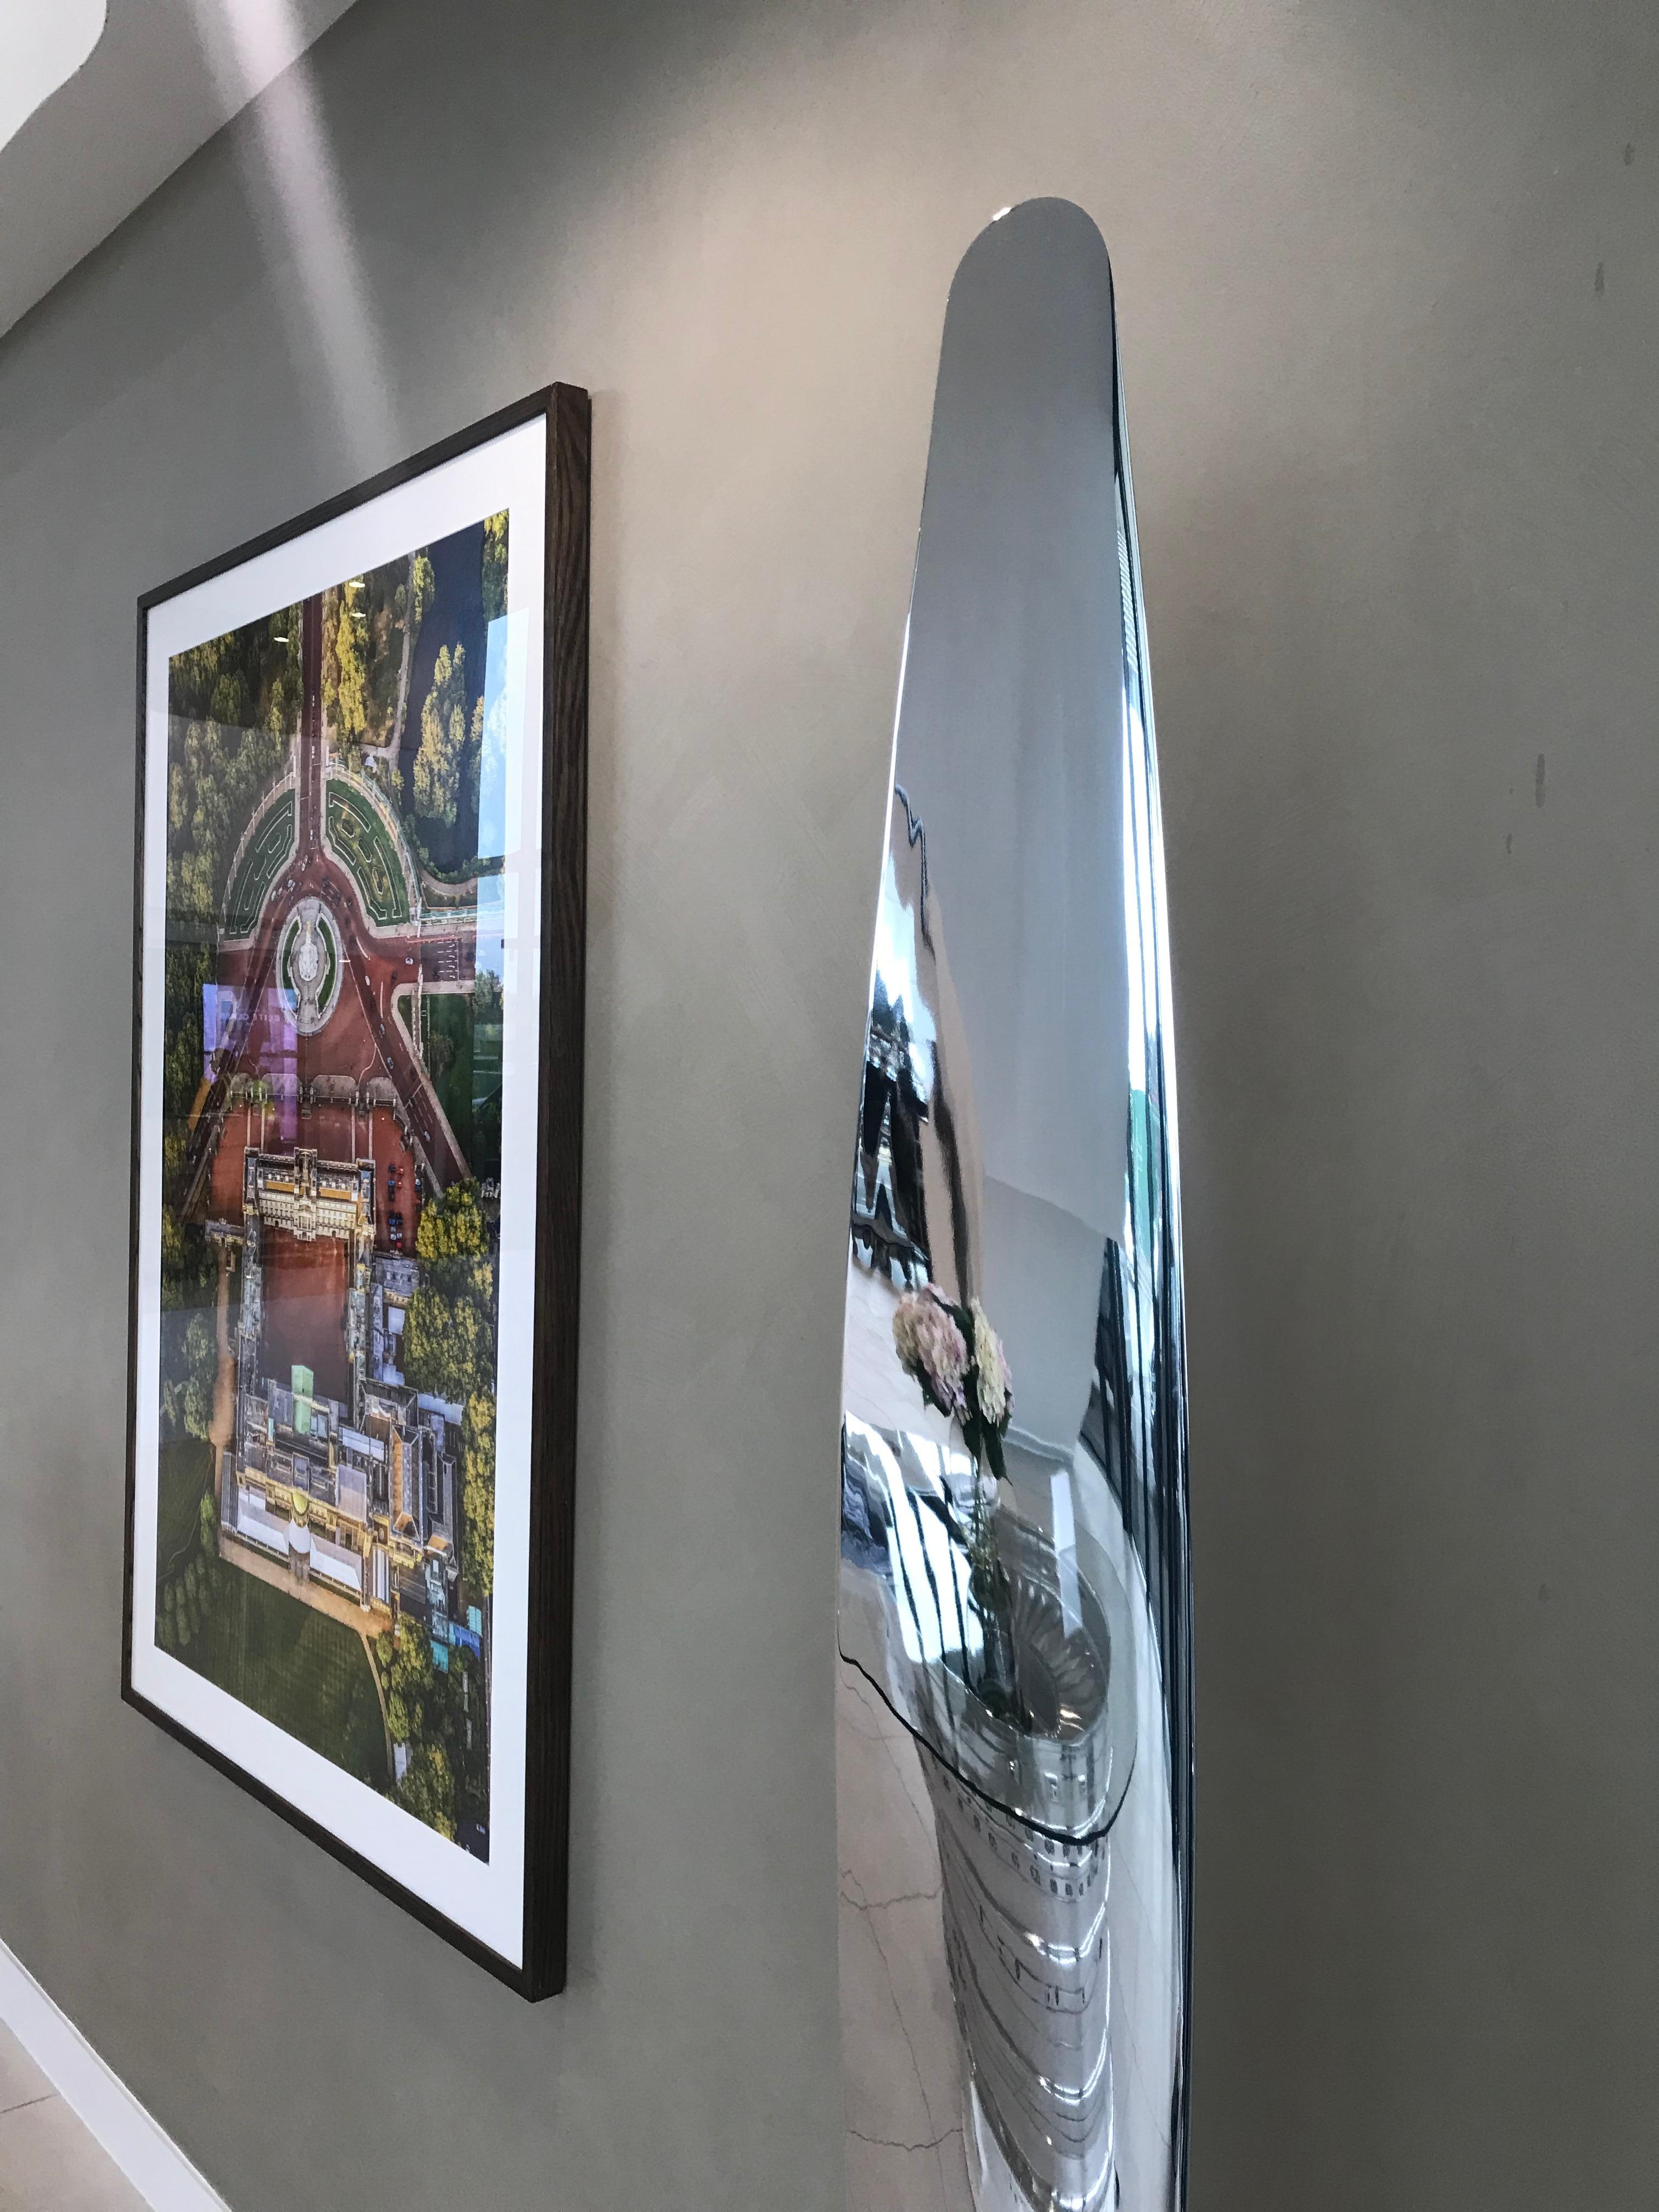 A highly polished aluminium aircraft propeller mounted on a custom made polished aluminium base. A lovely decorative piece offering superb reflections from the surface as shown in the photos.

Taken from an active RAF service bomber this variable